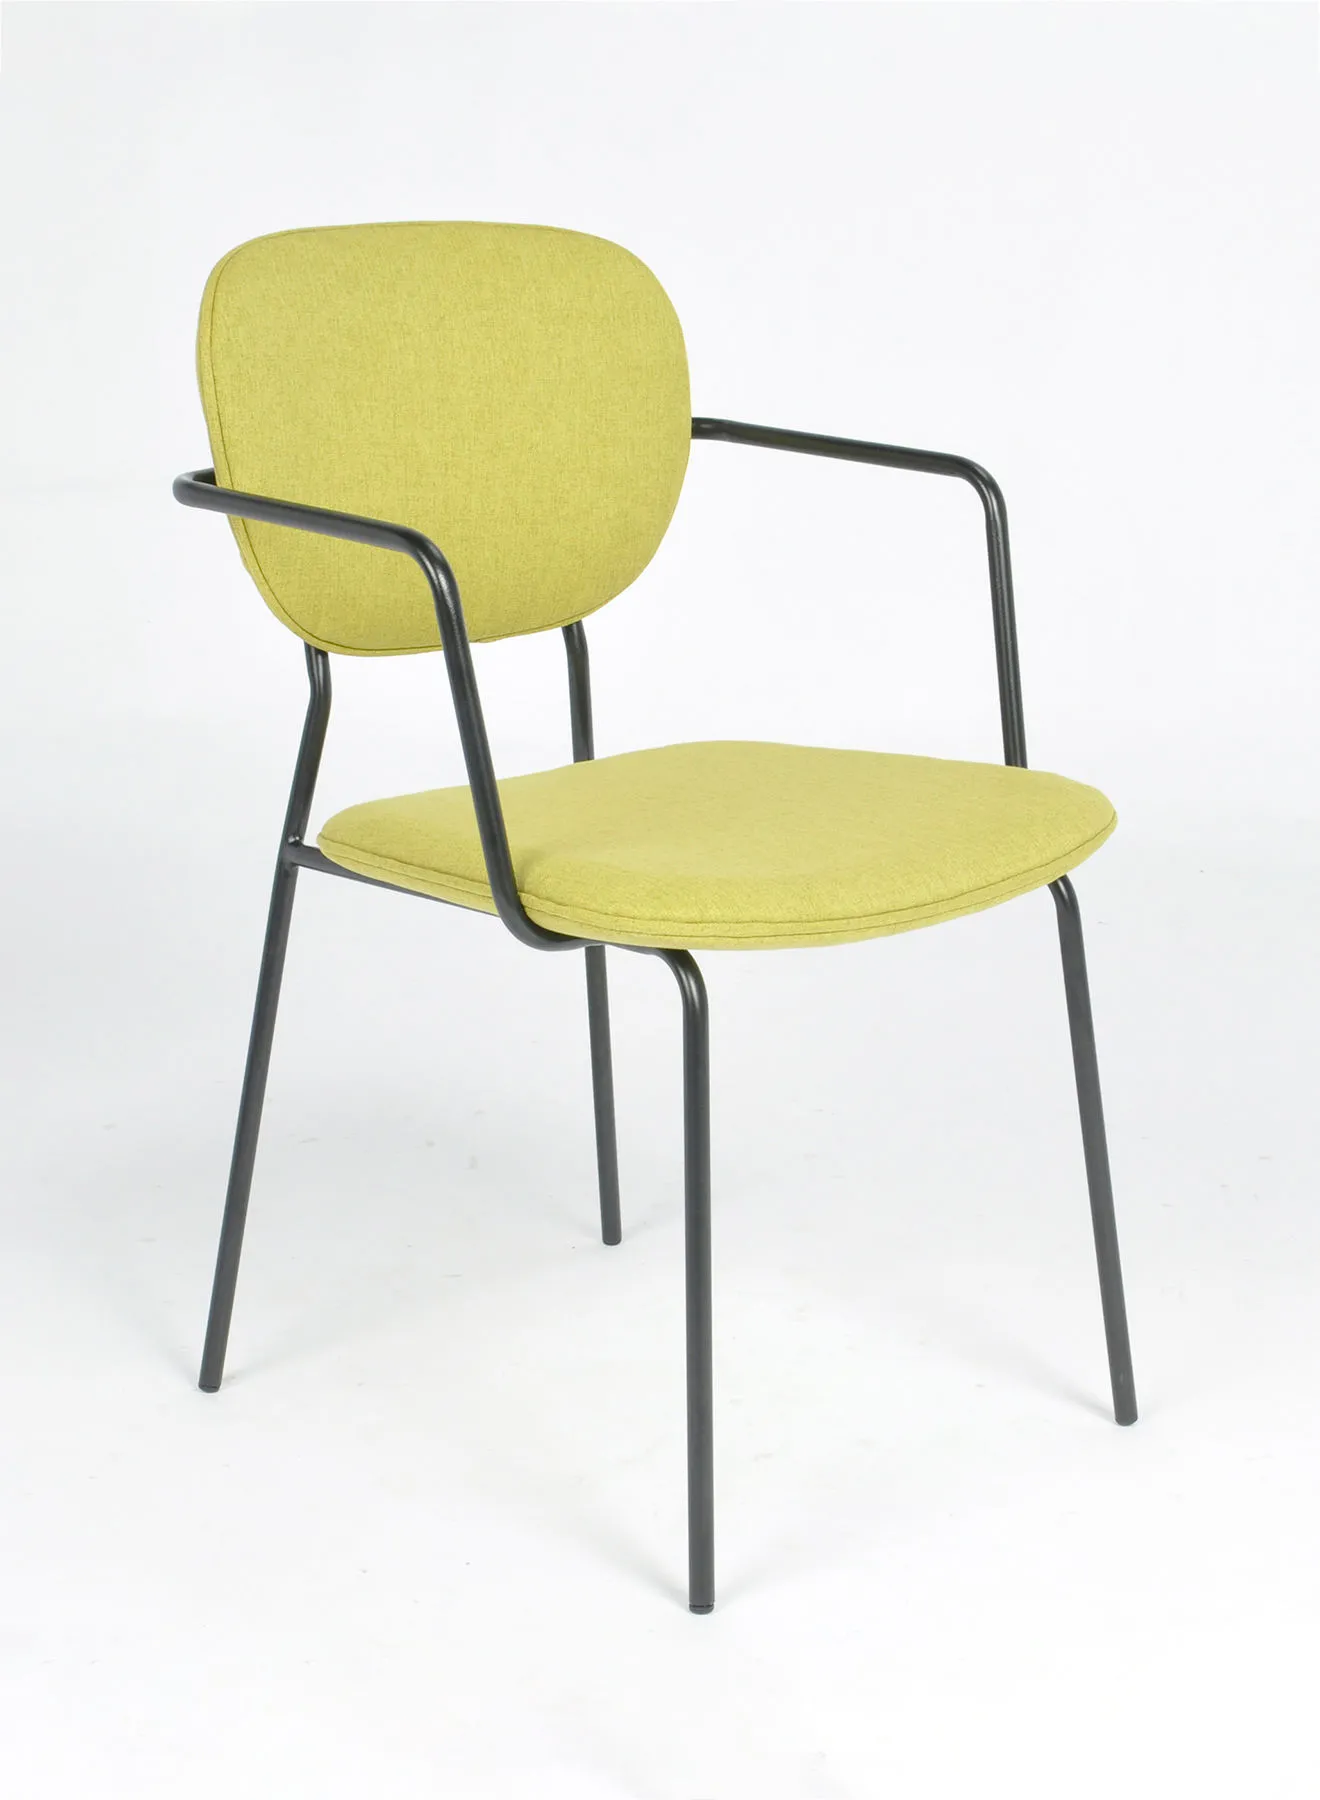 Switch Dining Chair In Green/Black Size 45 X 51 X 75